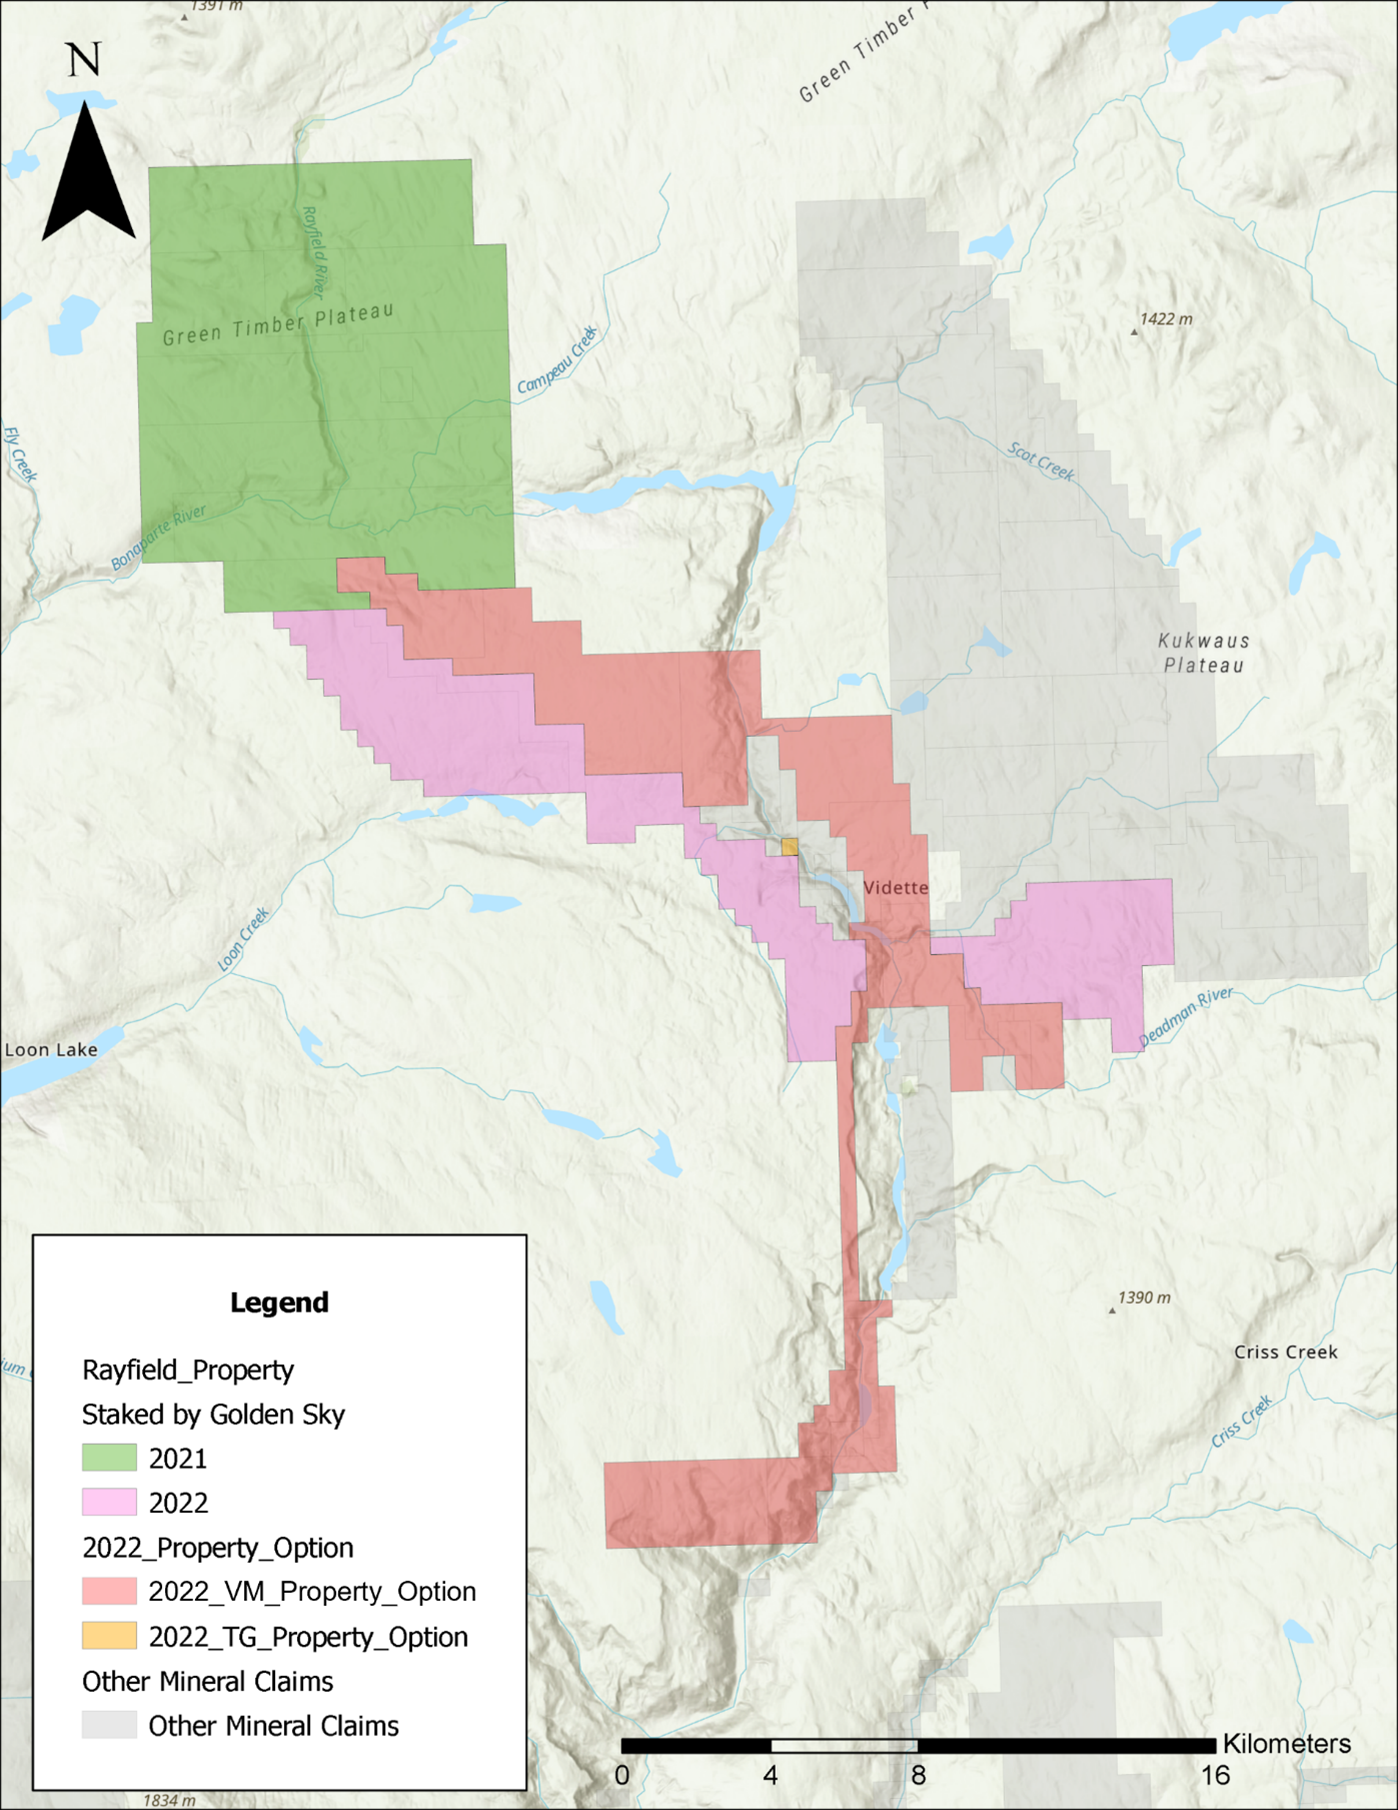 Golden Sky Minerals Expands the Rayfield Copper-Gold Property Through Staking and Option/Purchase Agreements, south-central British Columbia